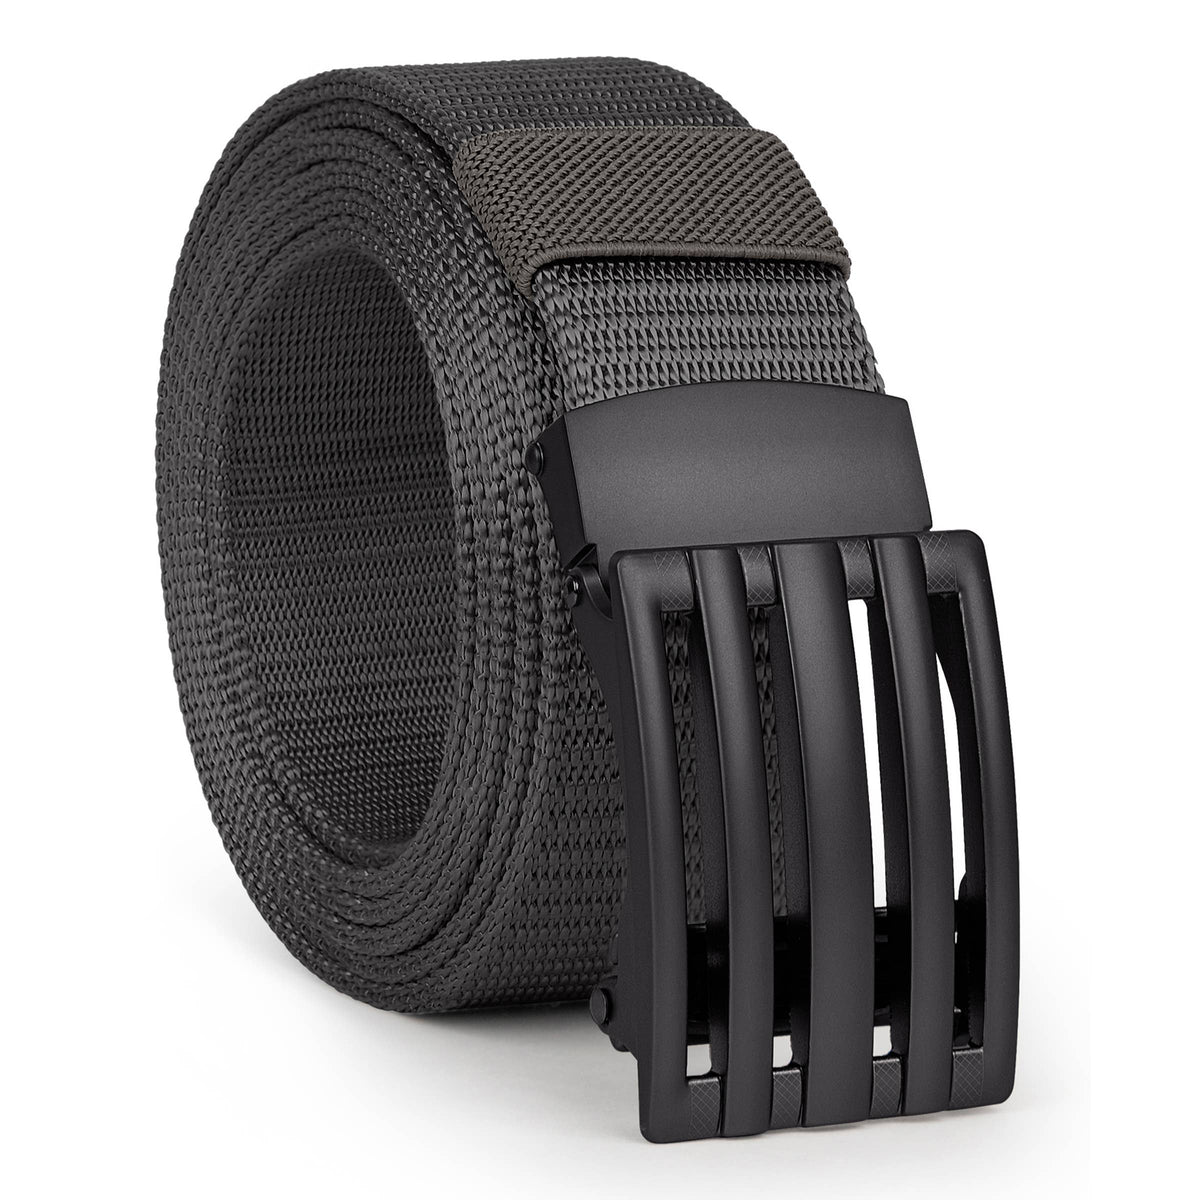 Mio Marino - Mens Tactical Ratchet Golf Belt: Adjustable from 28" to 44" Waist / Gray - BELT - Synik Clothing - synikclothing.com